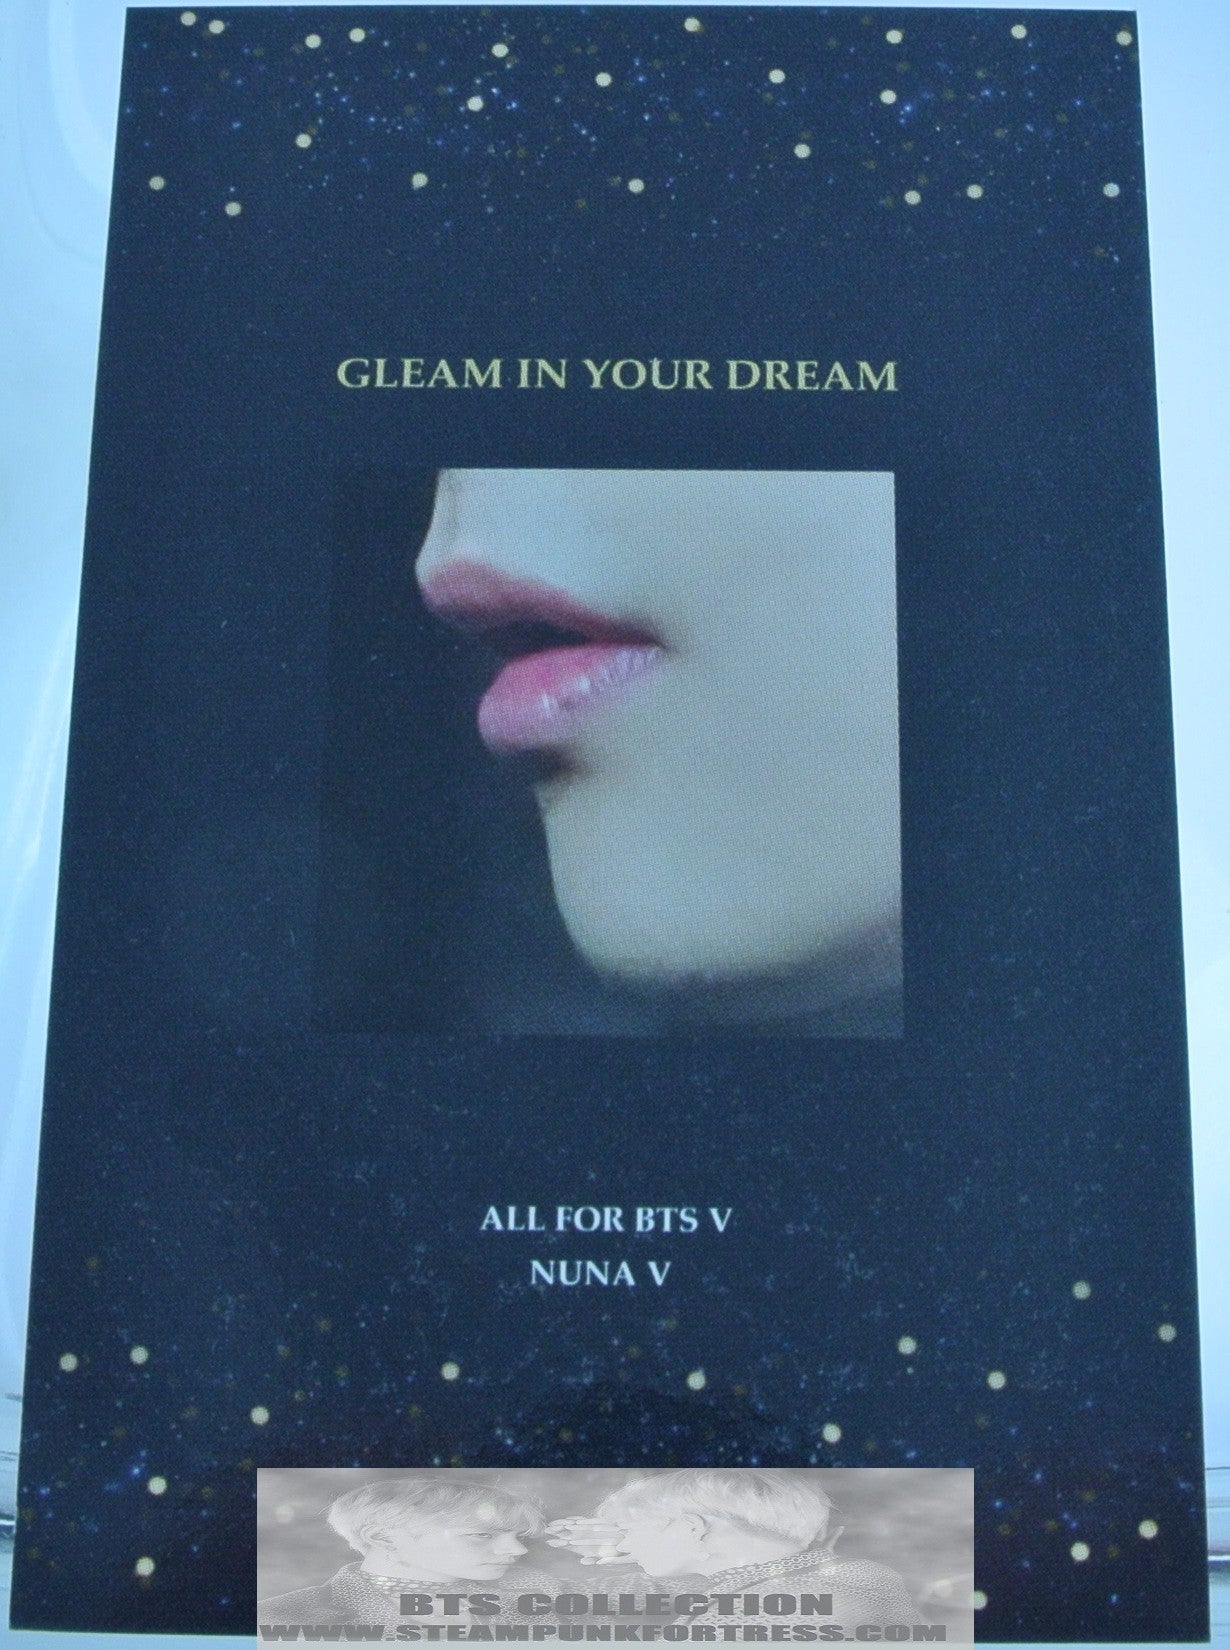 BTS V KIM TAEHYUNG FANSITE PHOTOCARD MOUTH OPEN PROFILE GLEAM IN YOUR DREAM NUNA V PHOTO CARD